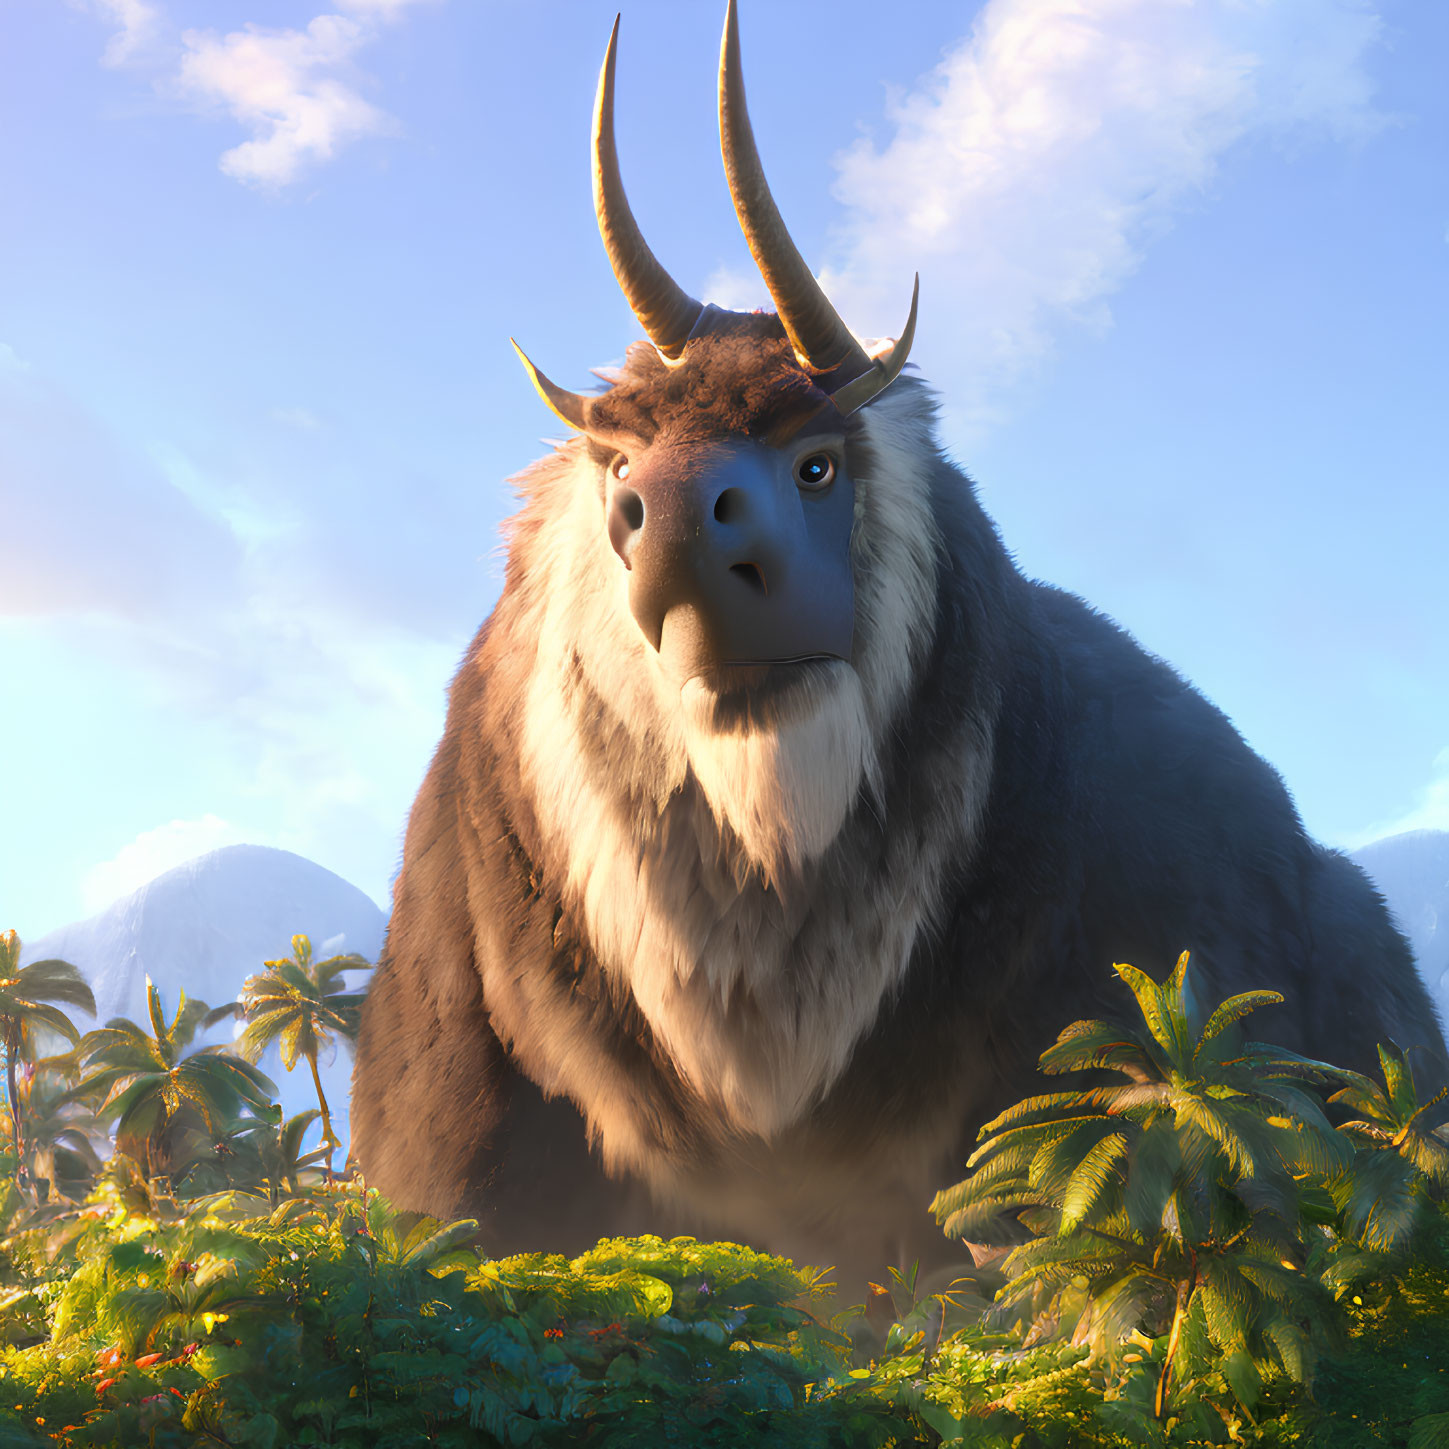 Animated Furry Creature with Horns in Sunny Jungle Environment